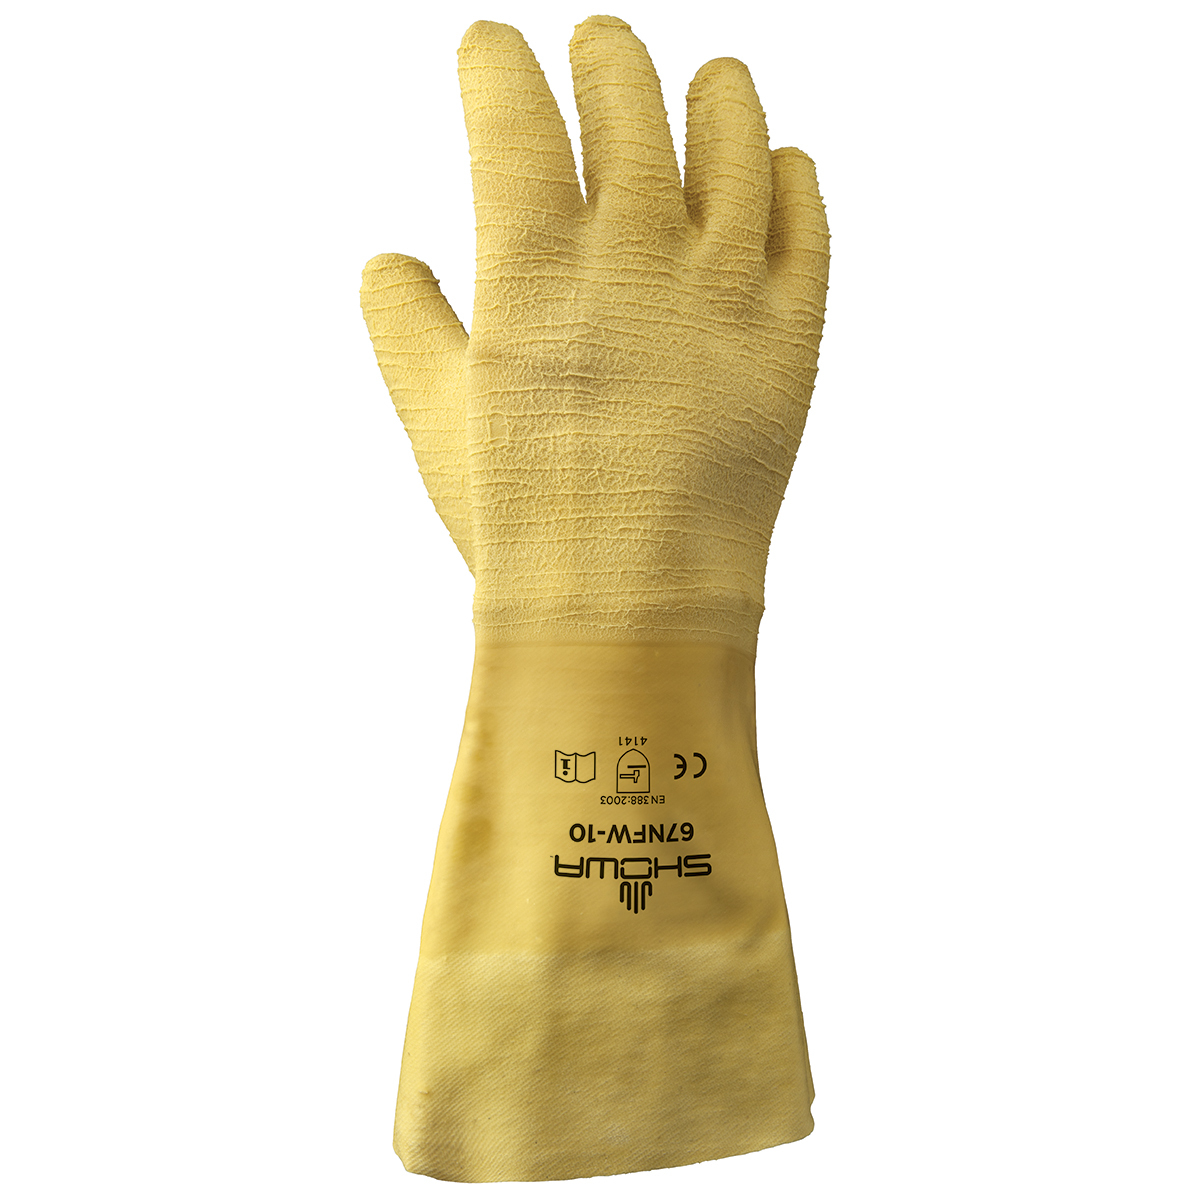 SHOWA® Size 10 Heavy Duty Natural Rubber Full Hand Coated Work Gloves With Cotton Liner And Gauntlet Cuff